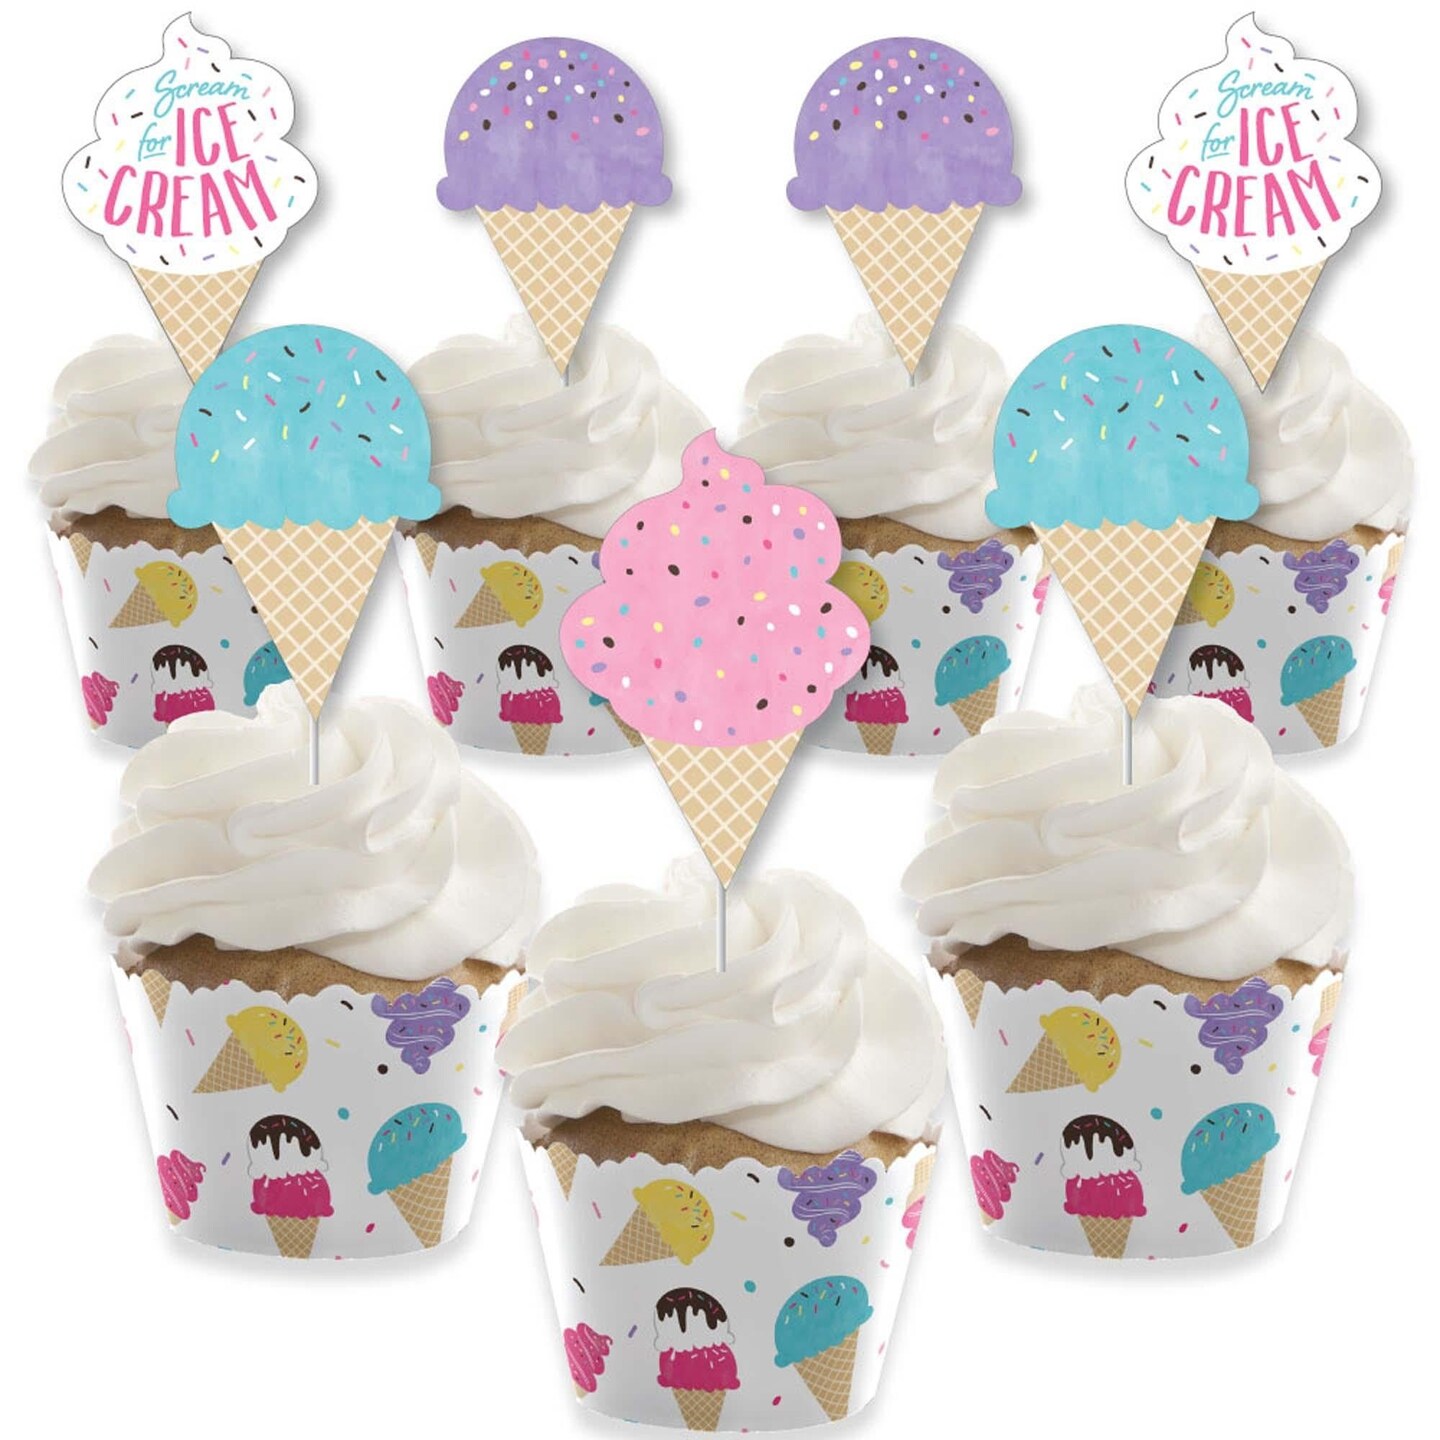 Big Dot of Happiness Scoop Up the Fun - Ice Cream - Cupcake Decoration -  Sprinkles Party Cupcake Wrappers and Treat Picks Kit - Set of 24